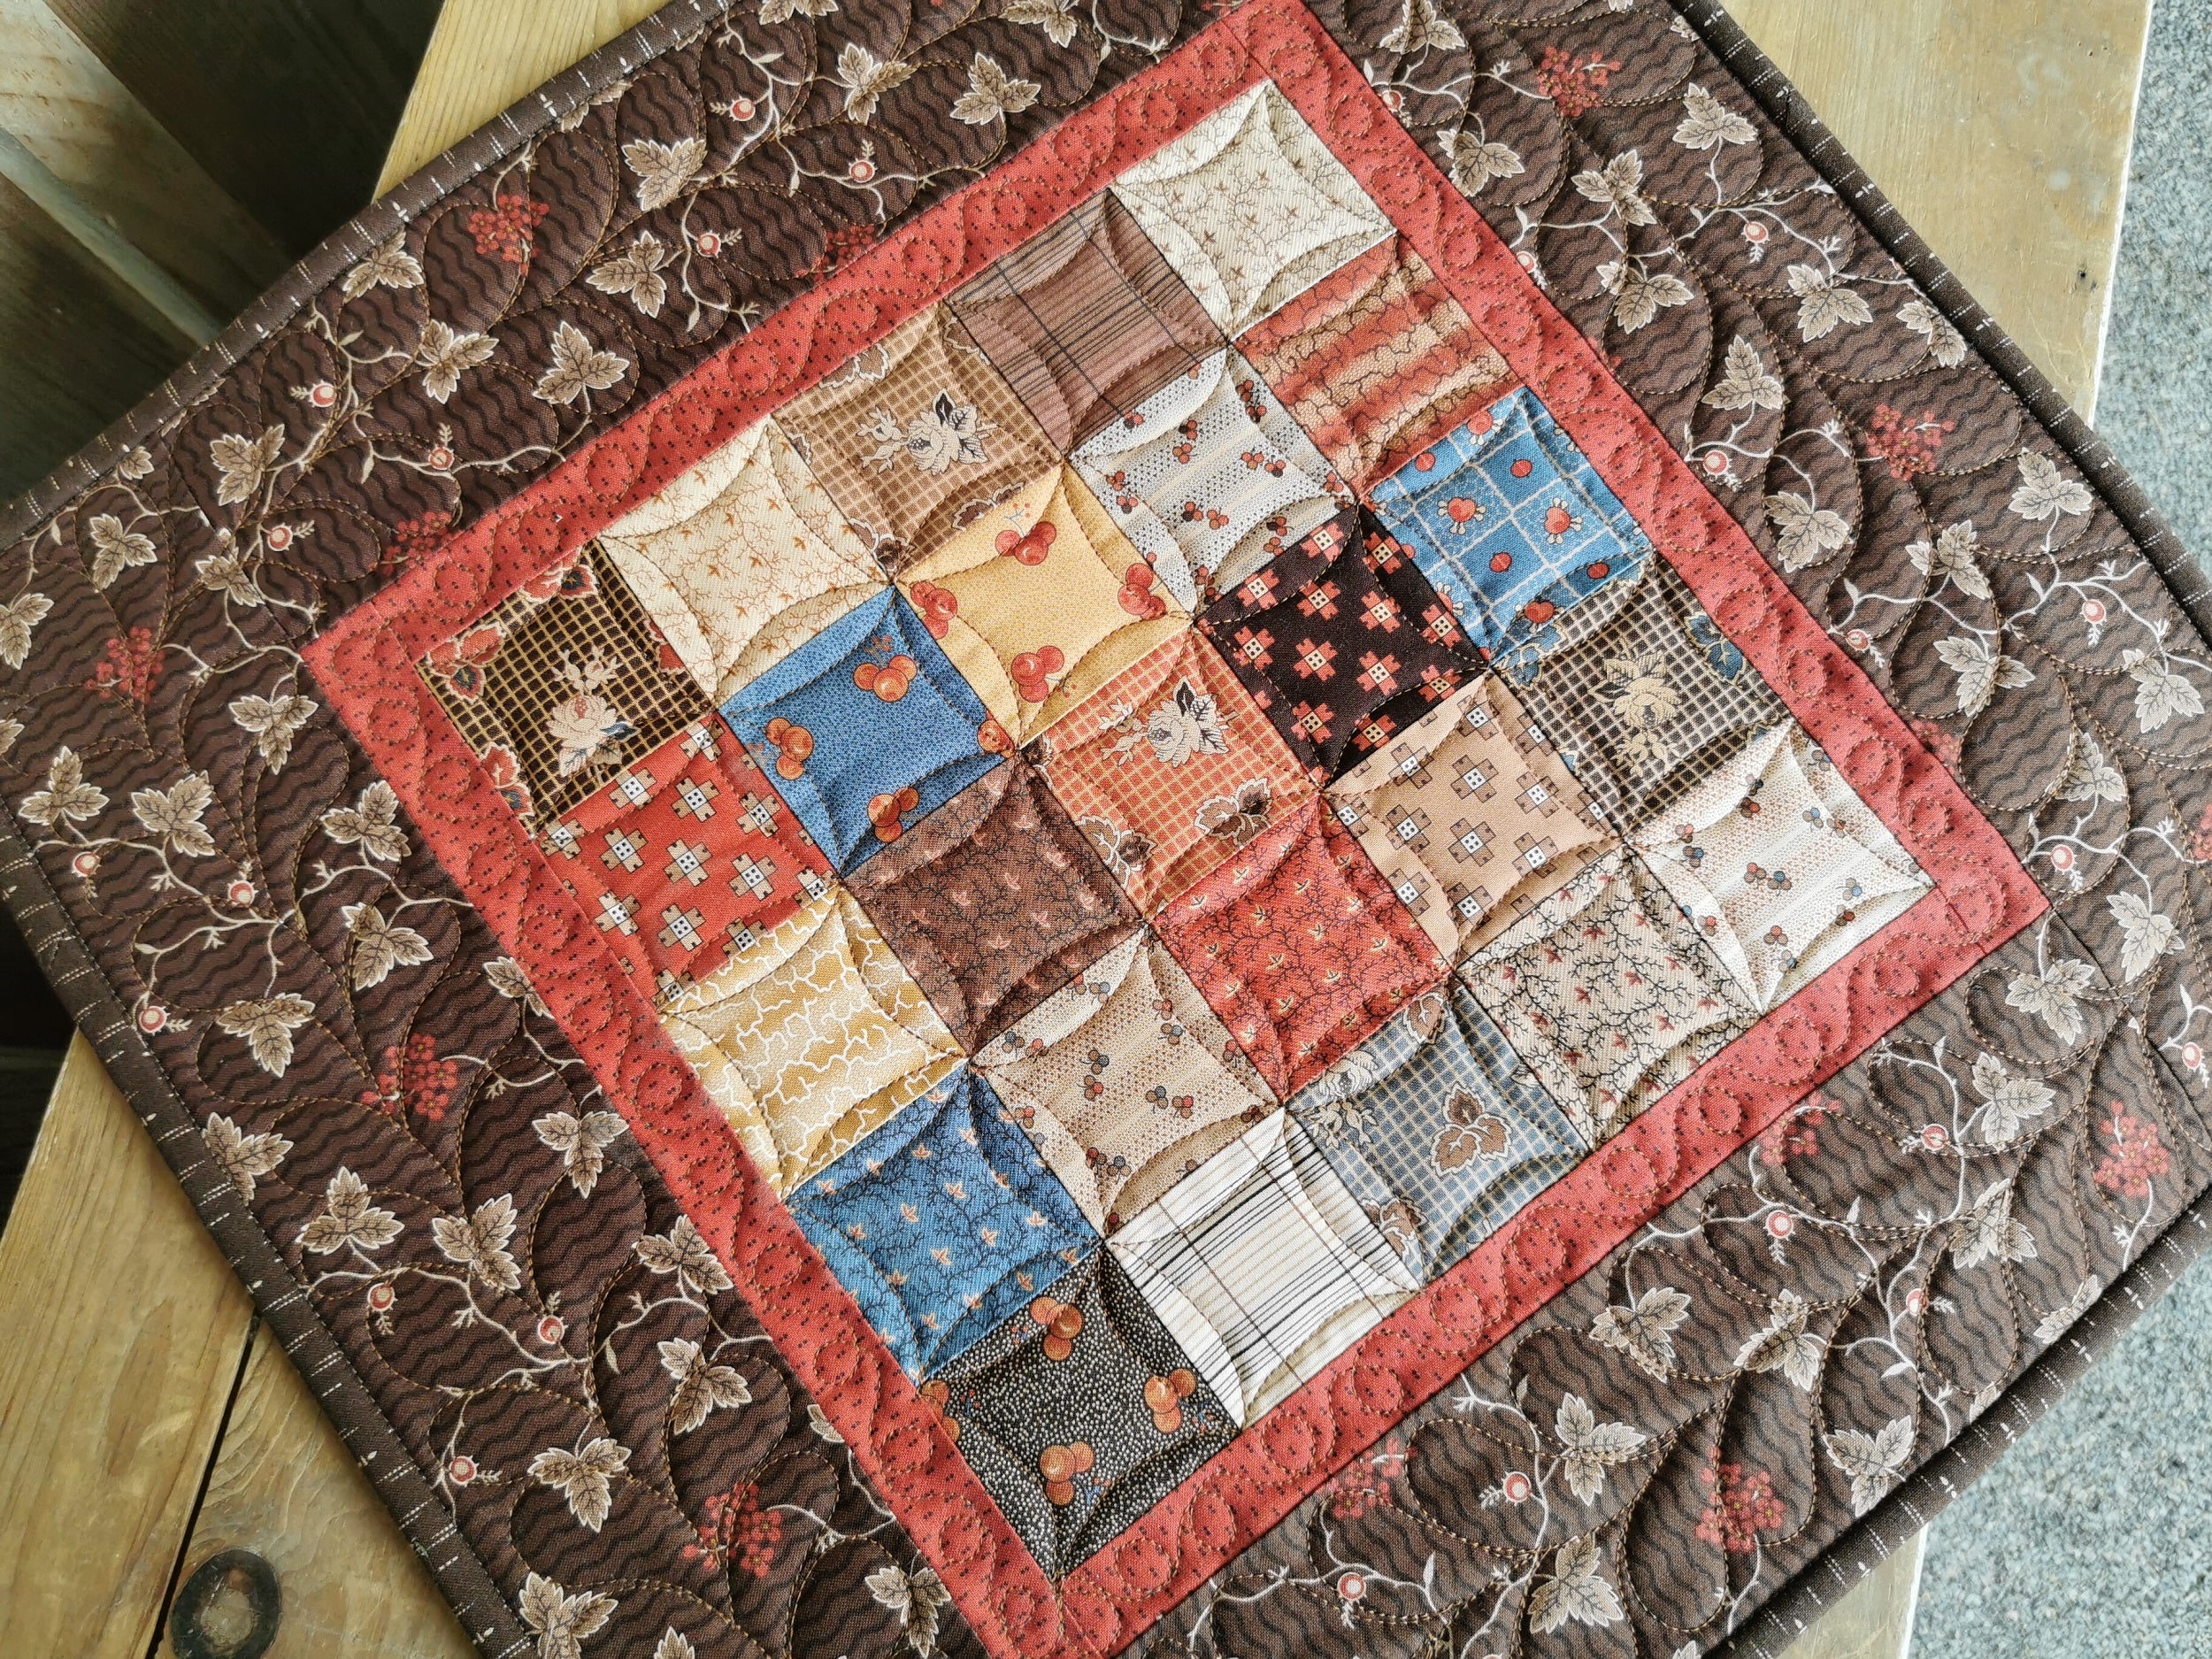 overhead view of the quilted table topper. Lighting enhances the quilting to show the texture